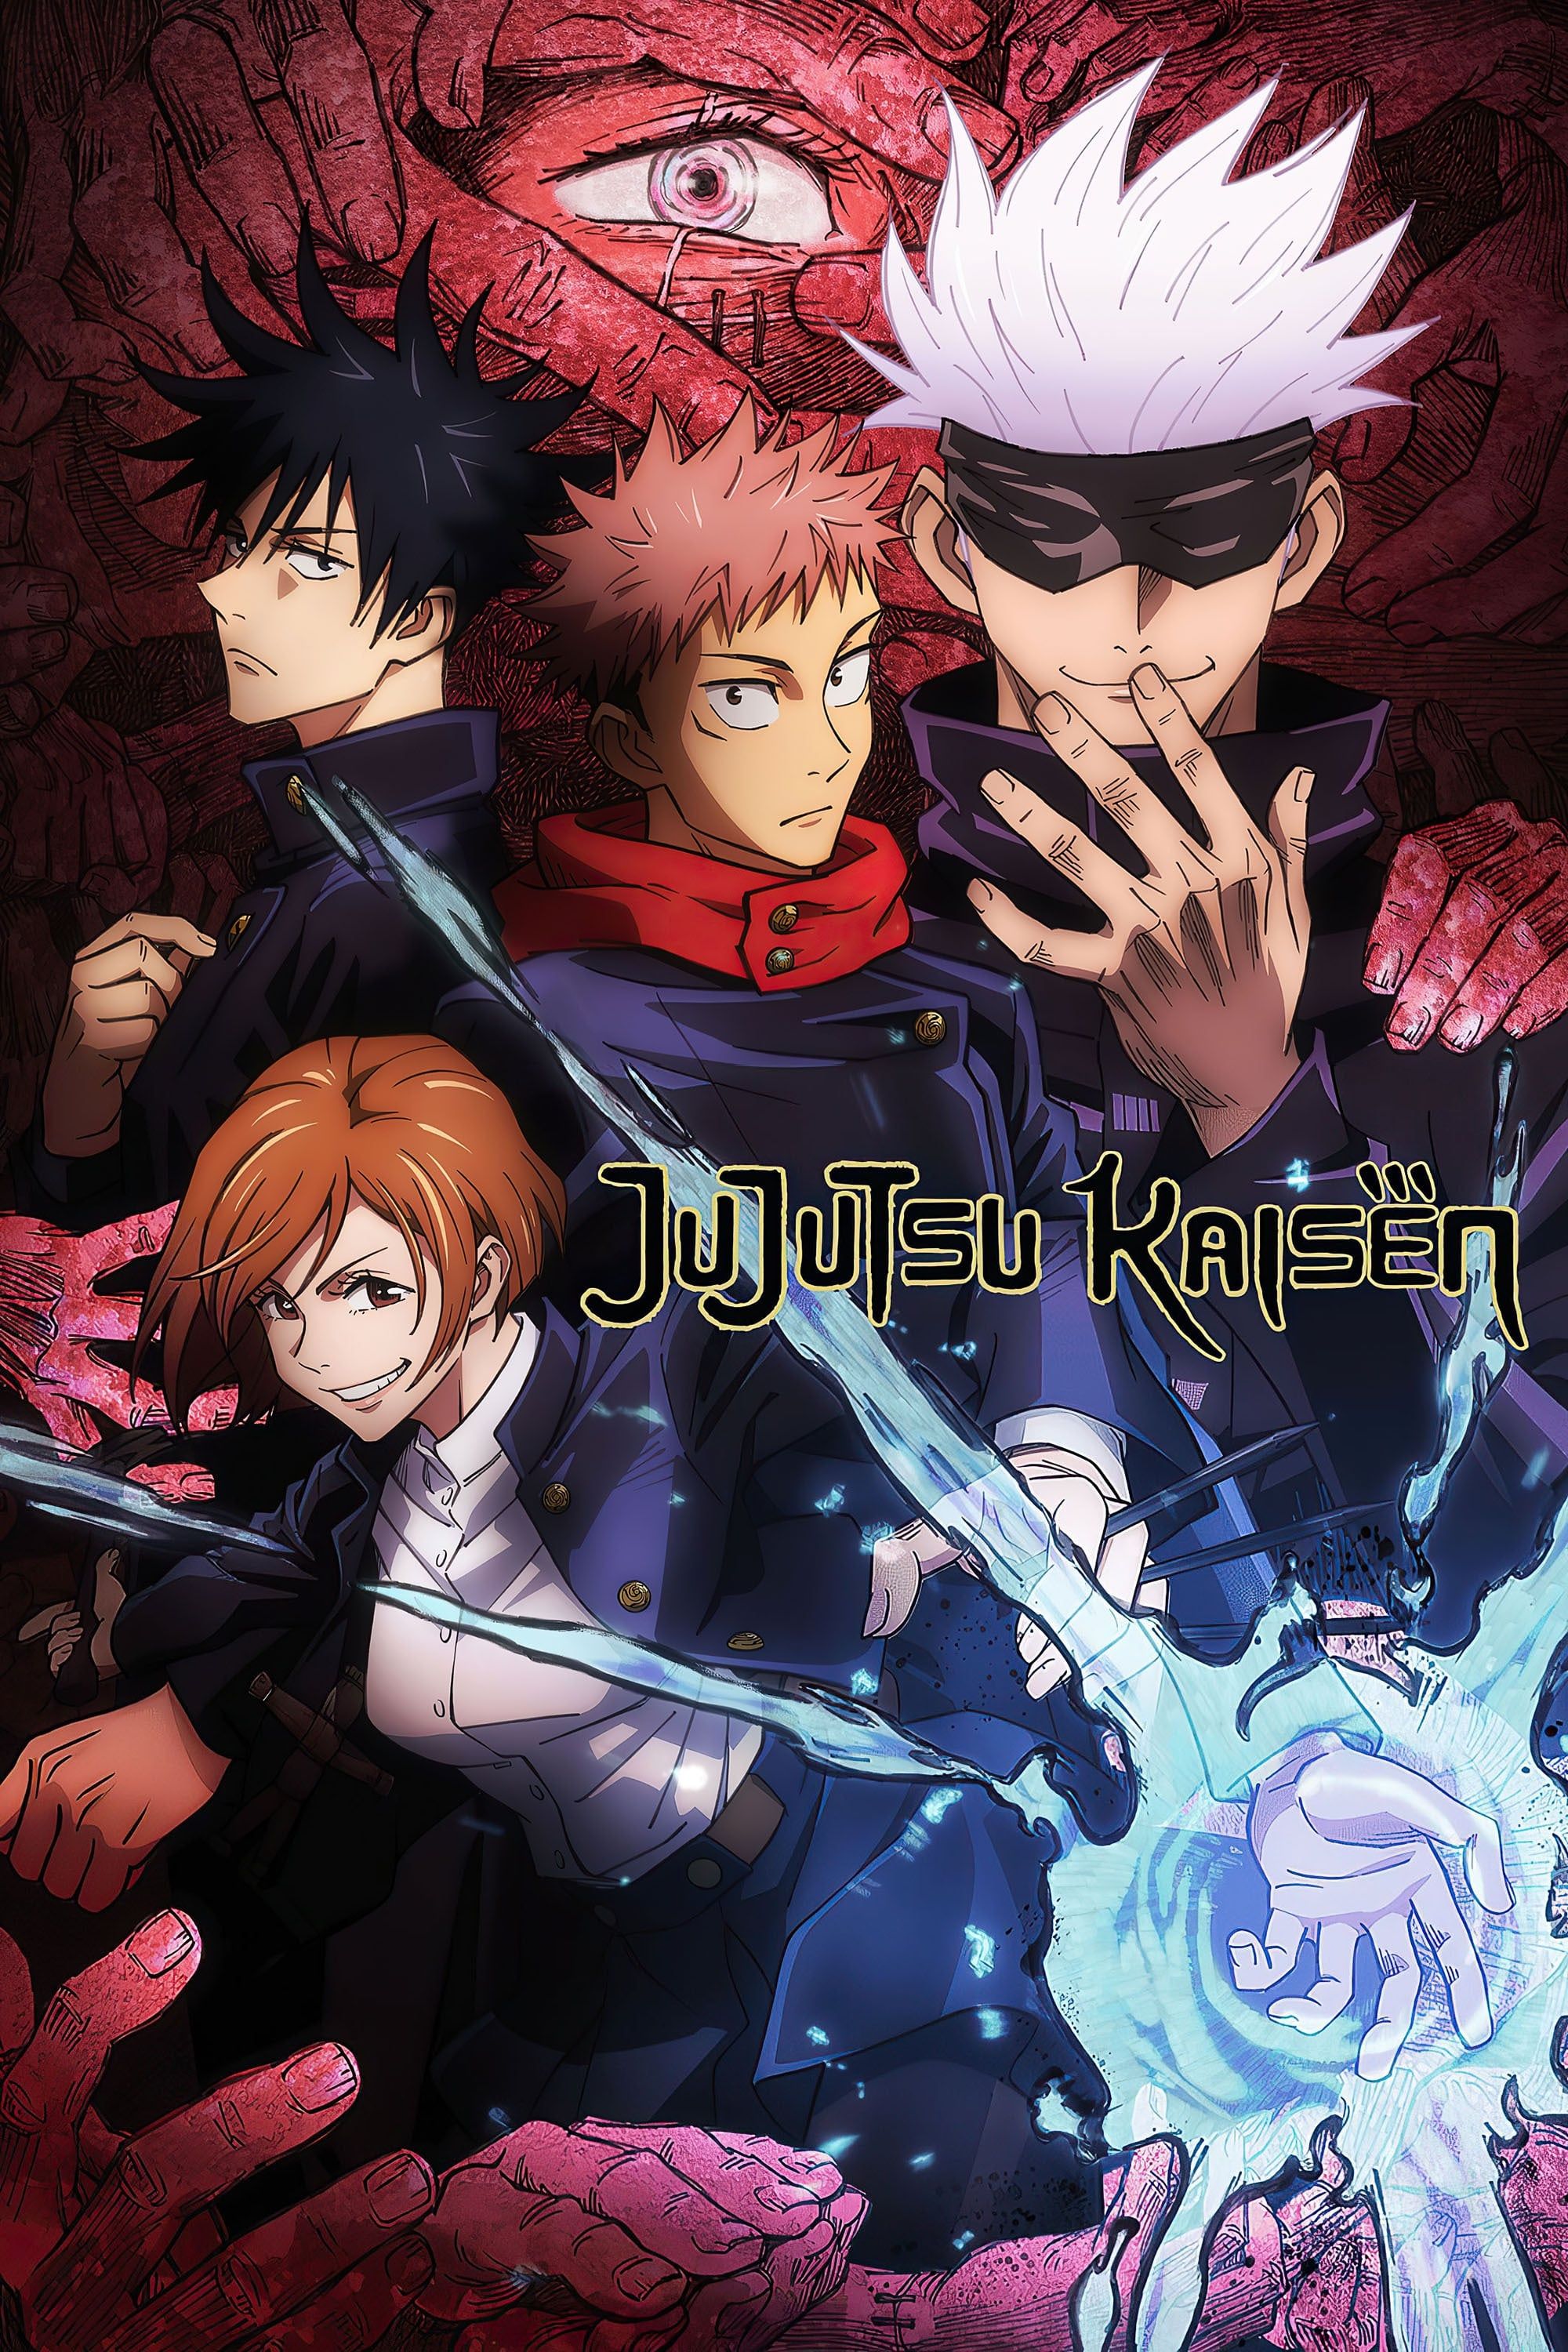 The cast pose together on the Jujutsu Kaisen Anime Poster